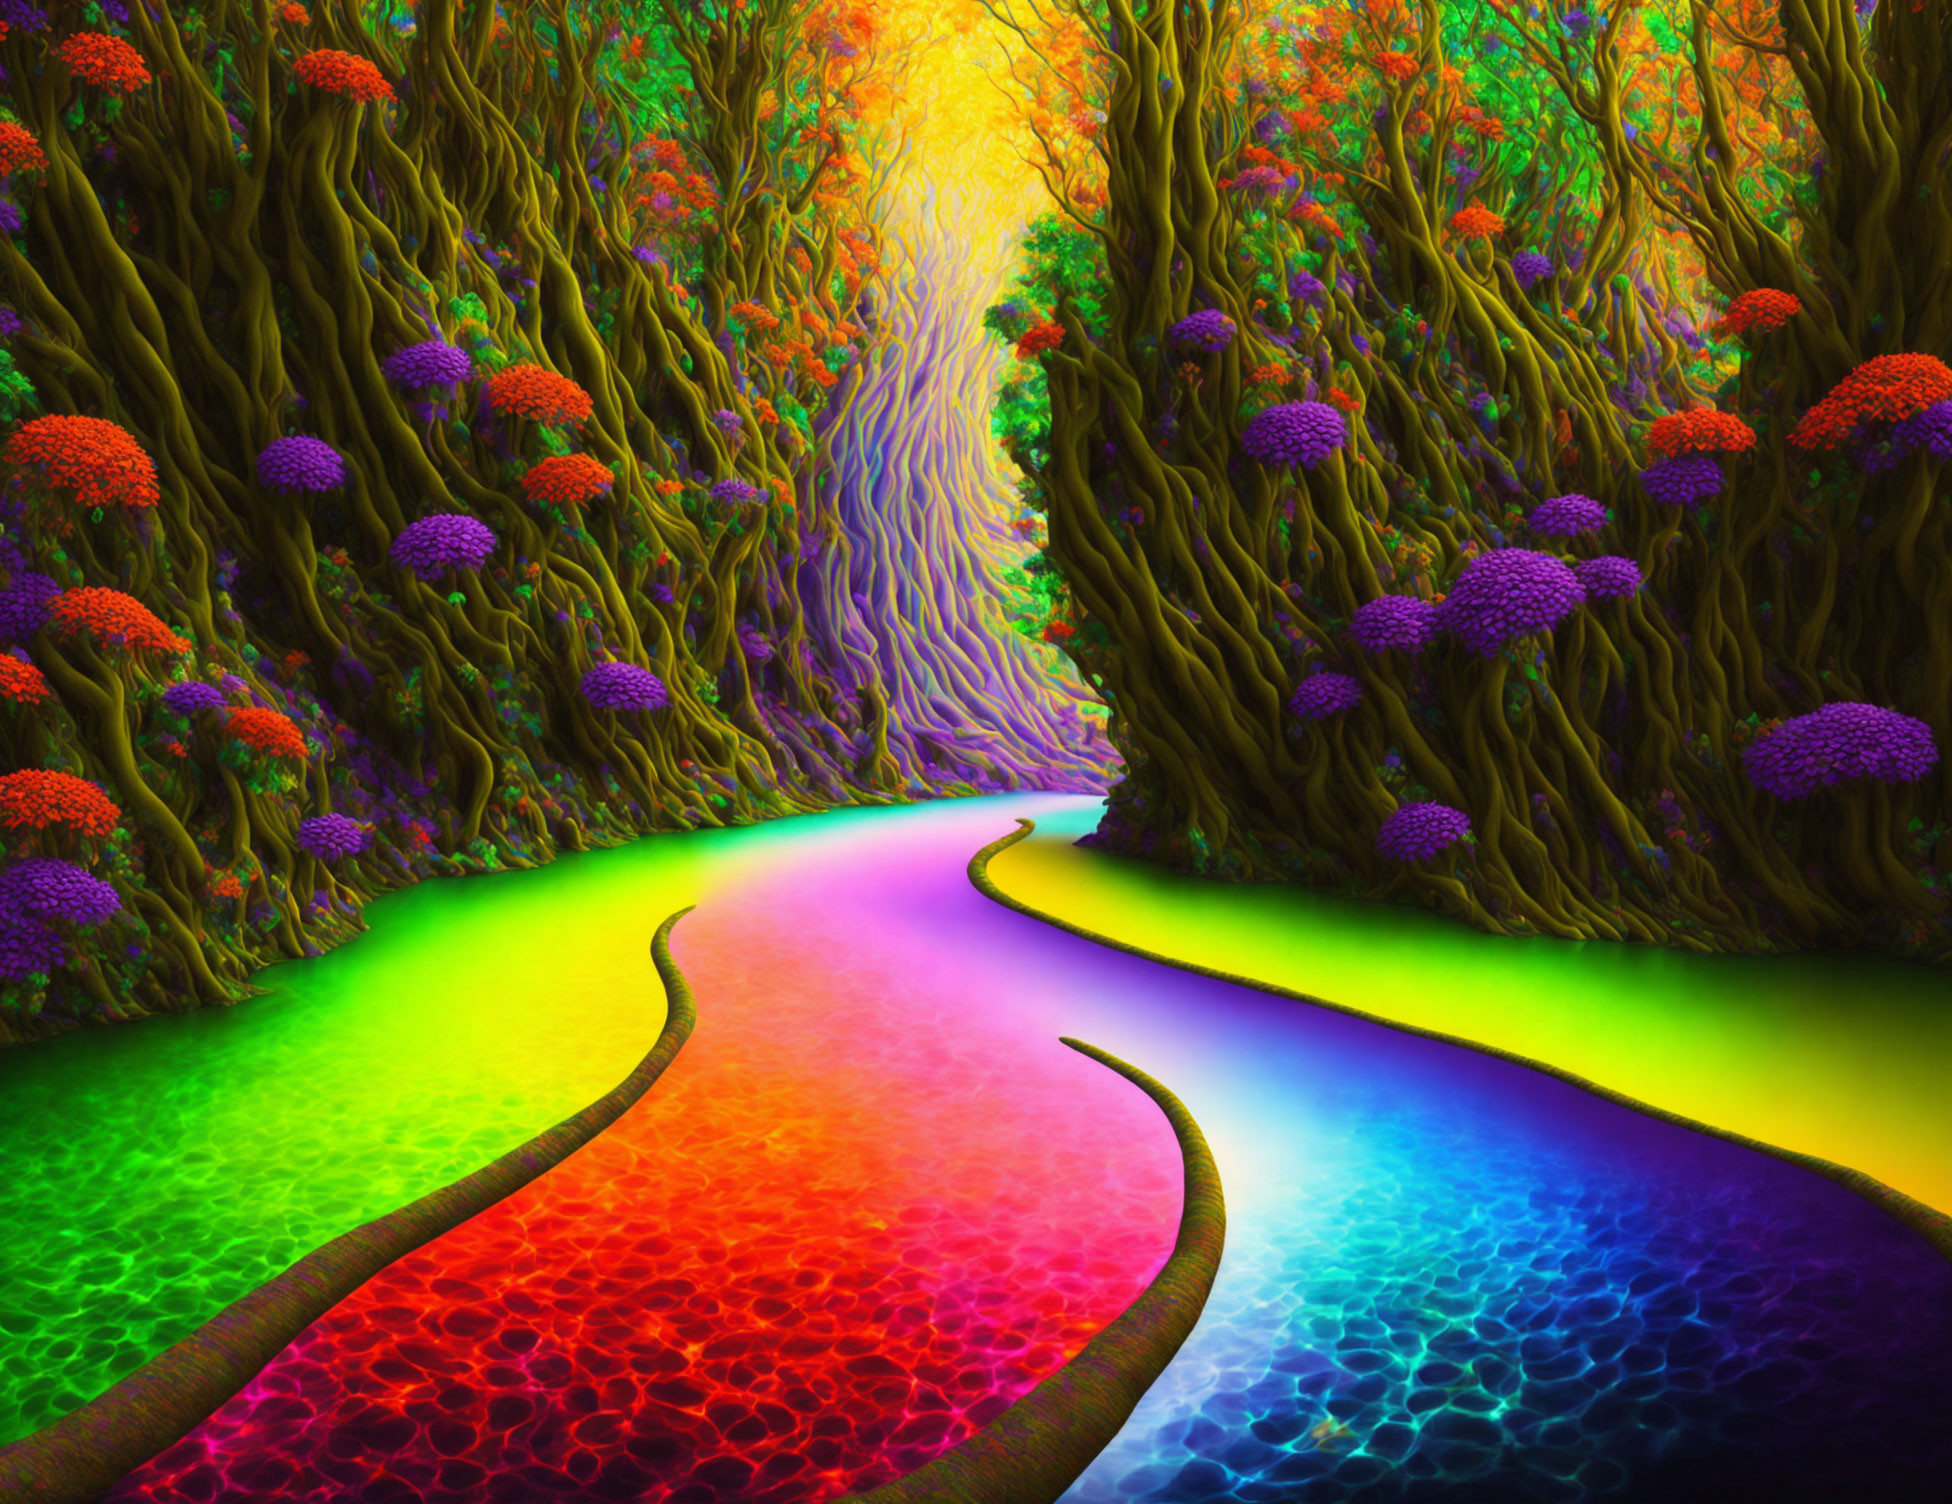 Colorful Fantasy Forest with Winding Path and Intertwined Trees